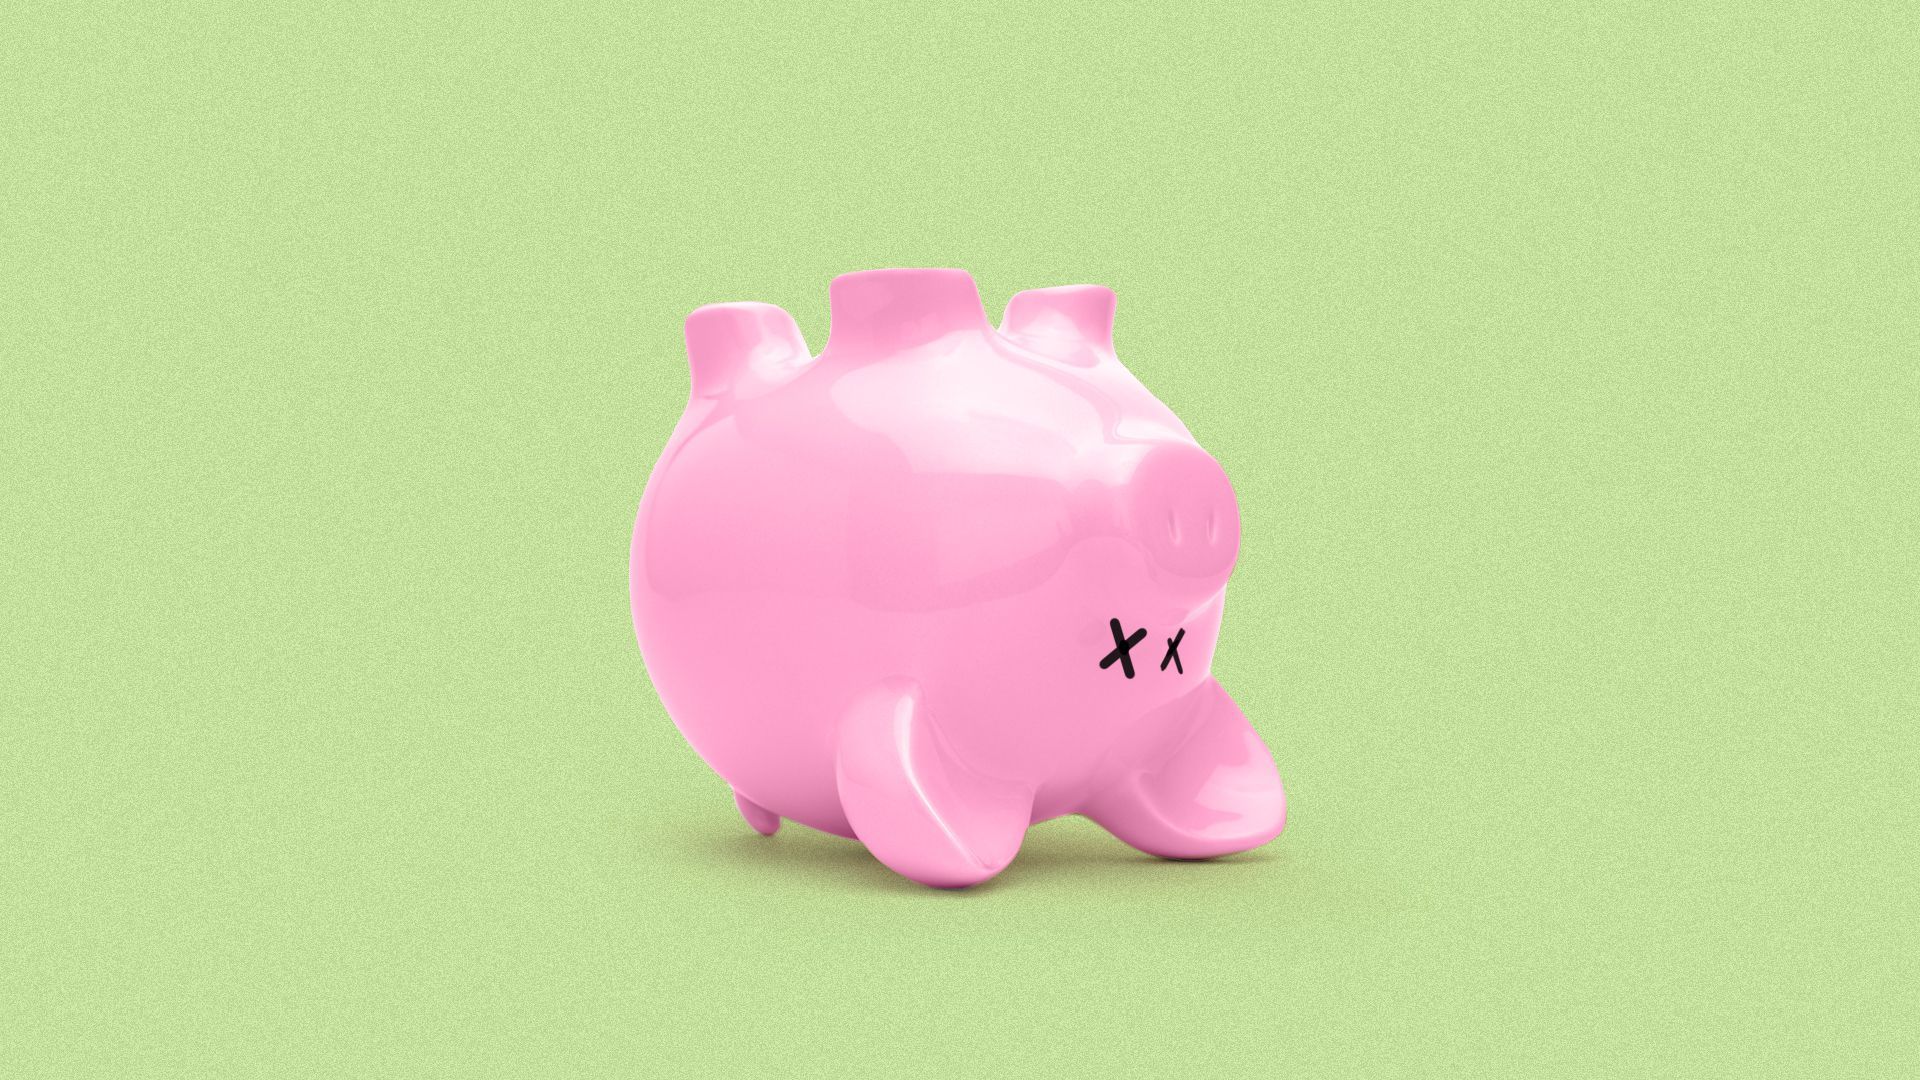 Illustration of an upside down piggy bank with X's for eyes.